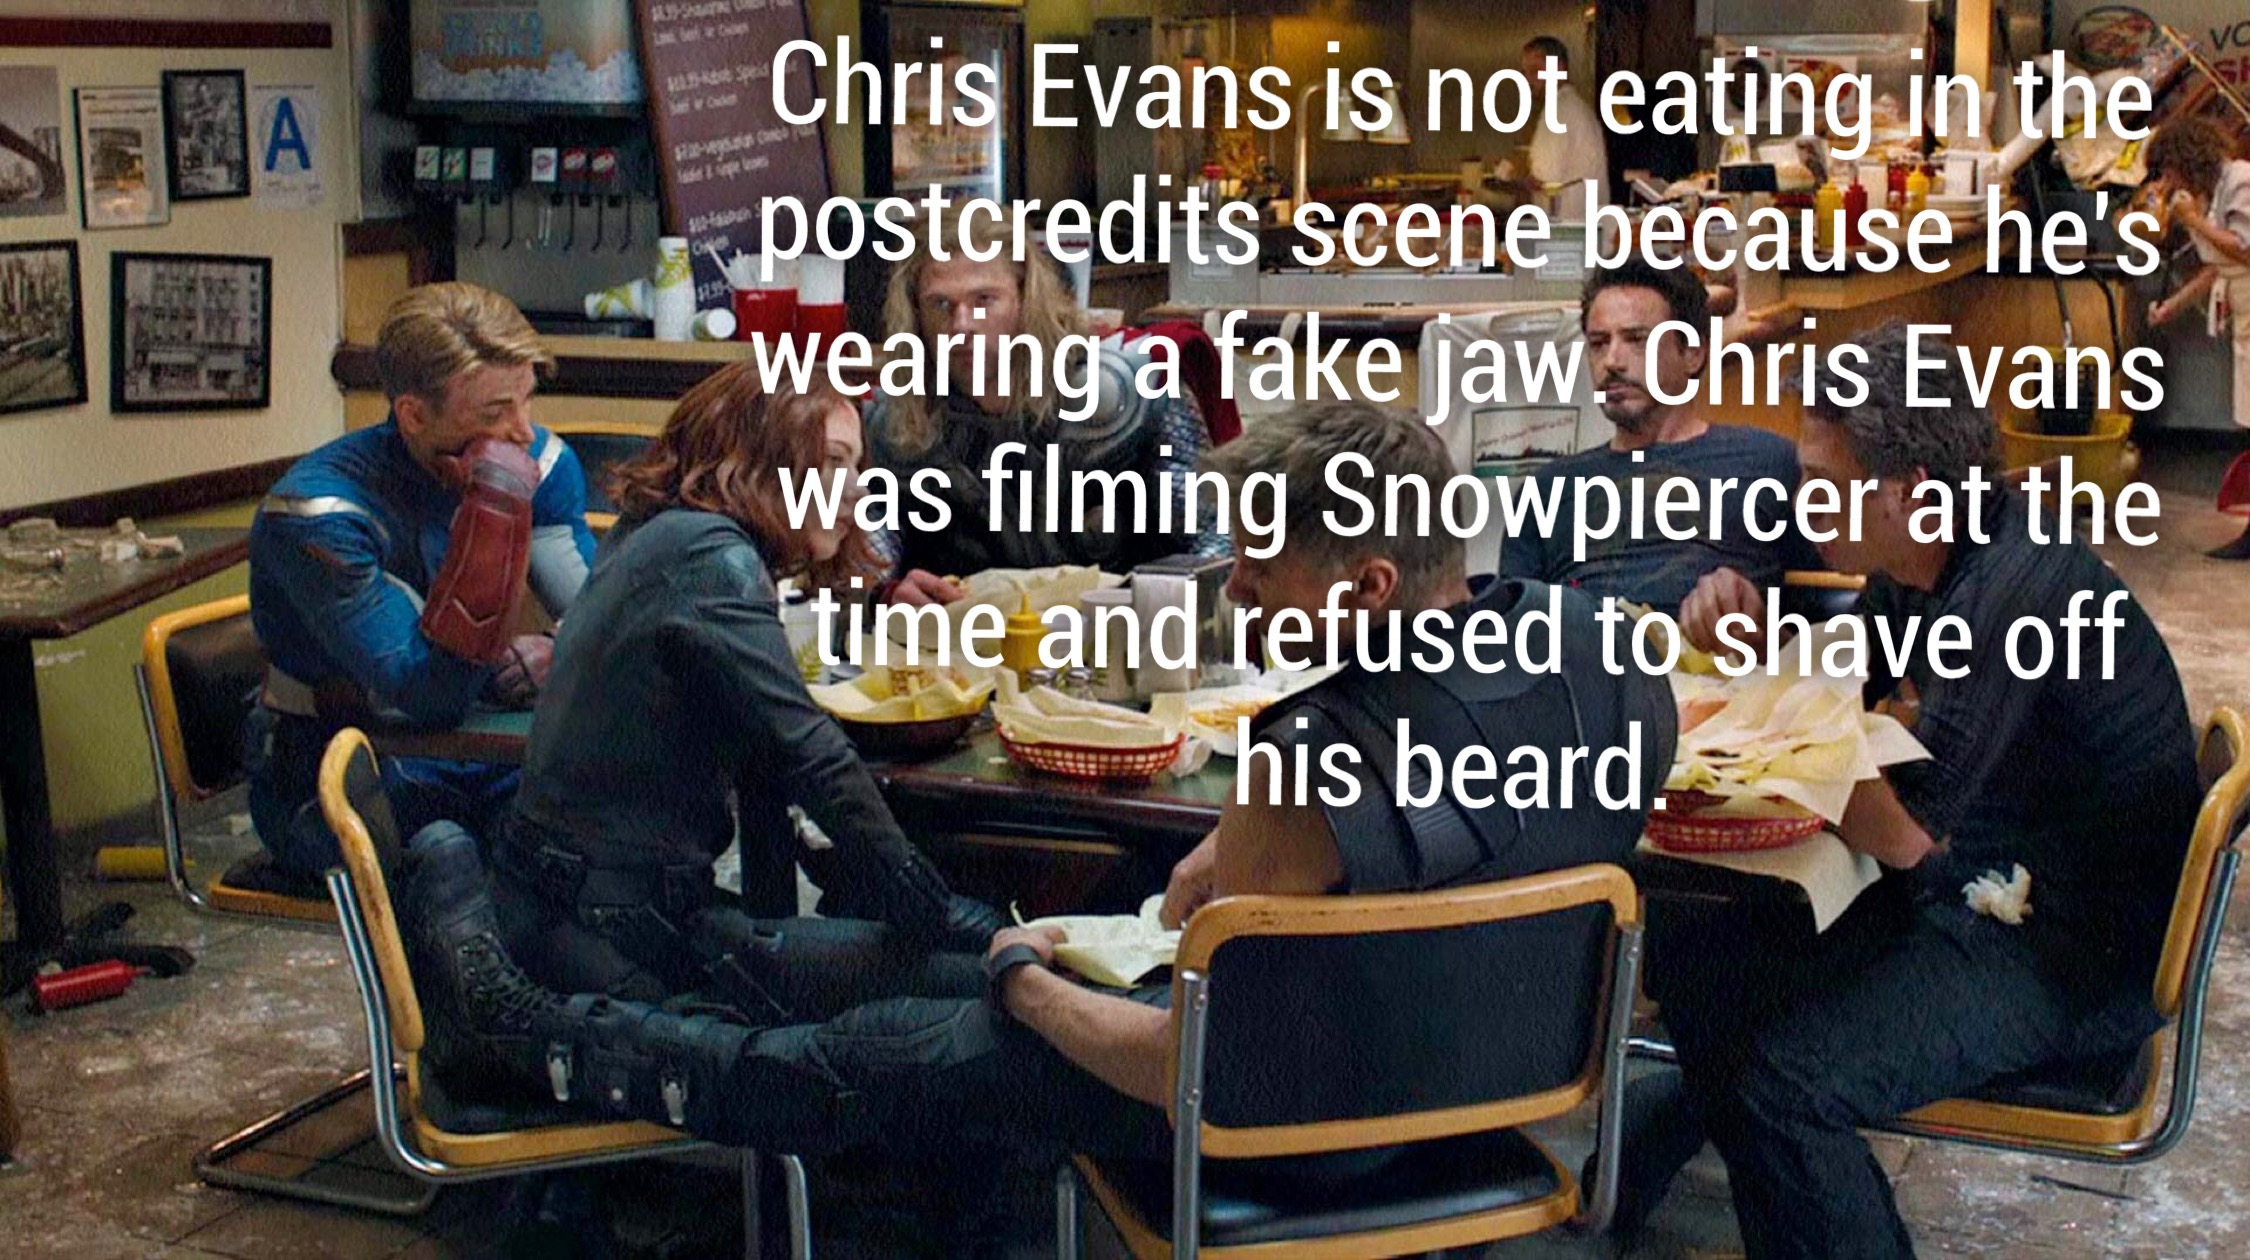 Chris Evans is not eating in the postcredits scene because he's "wearing a fake jaw. Chris Evans was filming Snowpiercer at the time and refused to shave off T his beard.